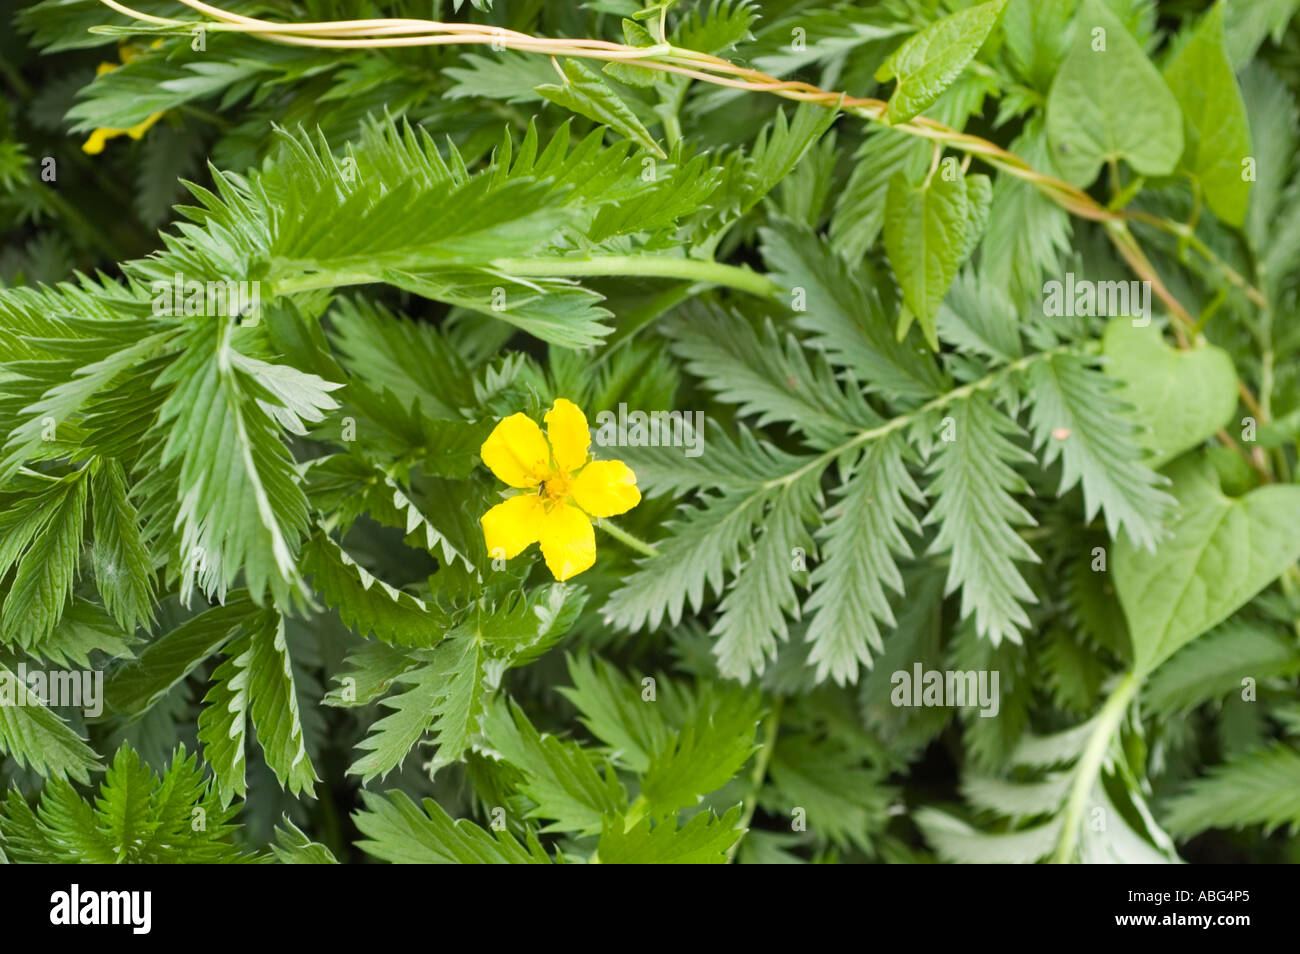 Yellow flower of silver weed or silverweed l Potentilla anserina Stock Photo